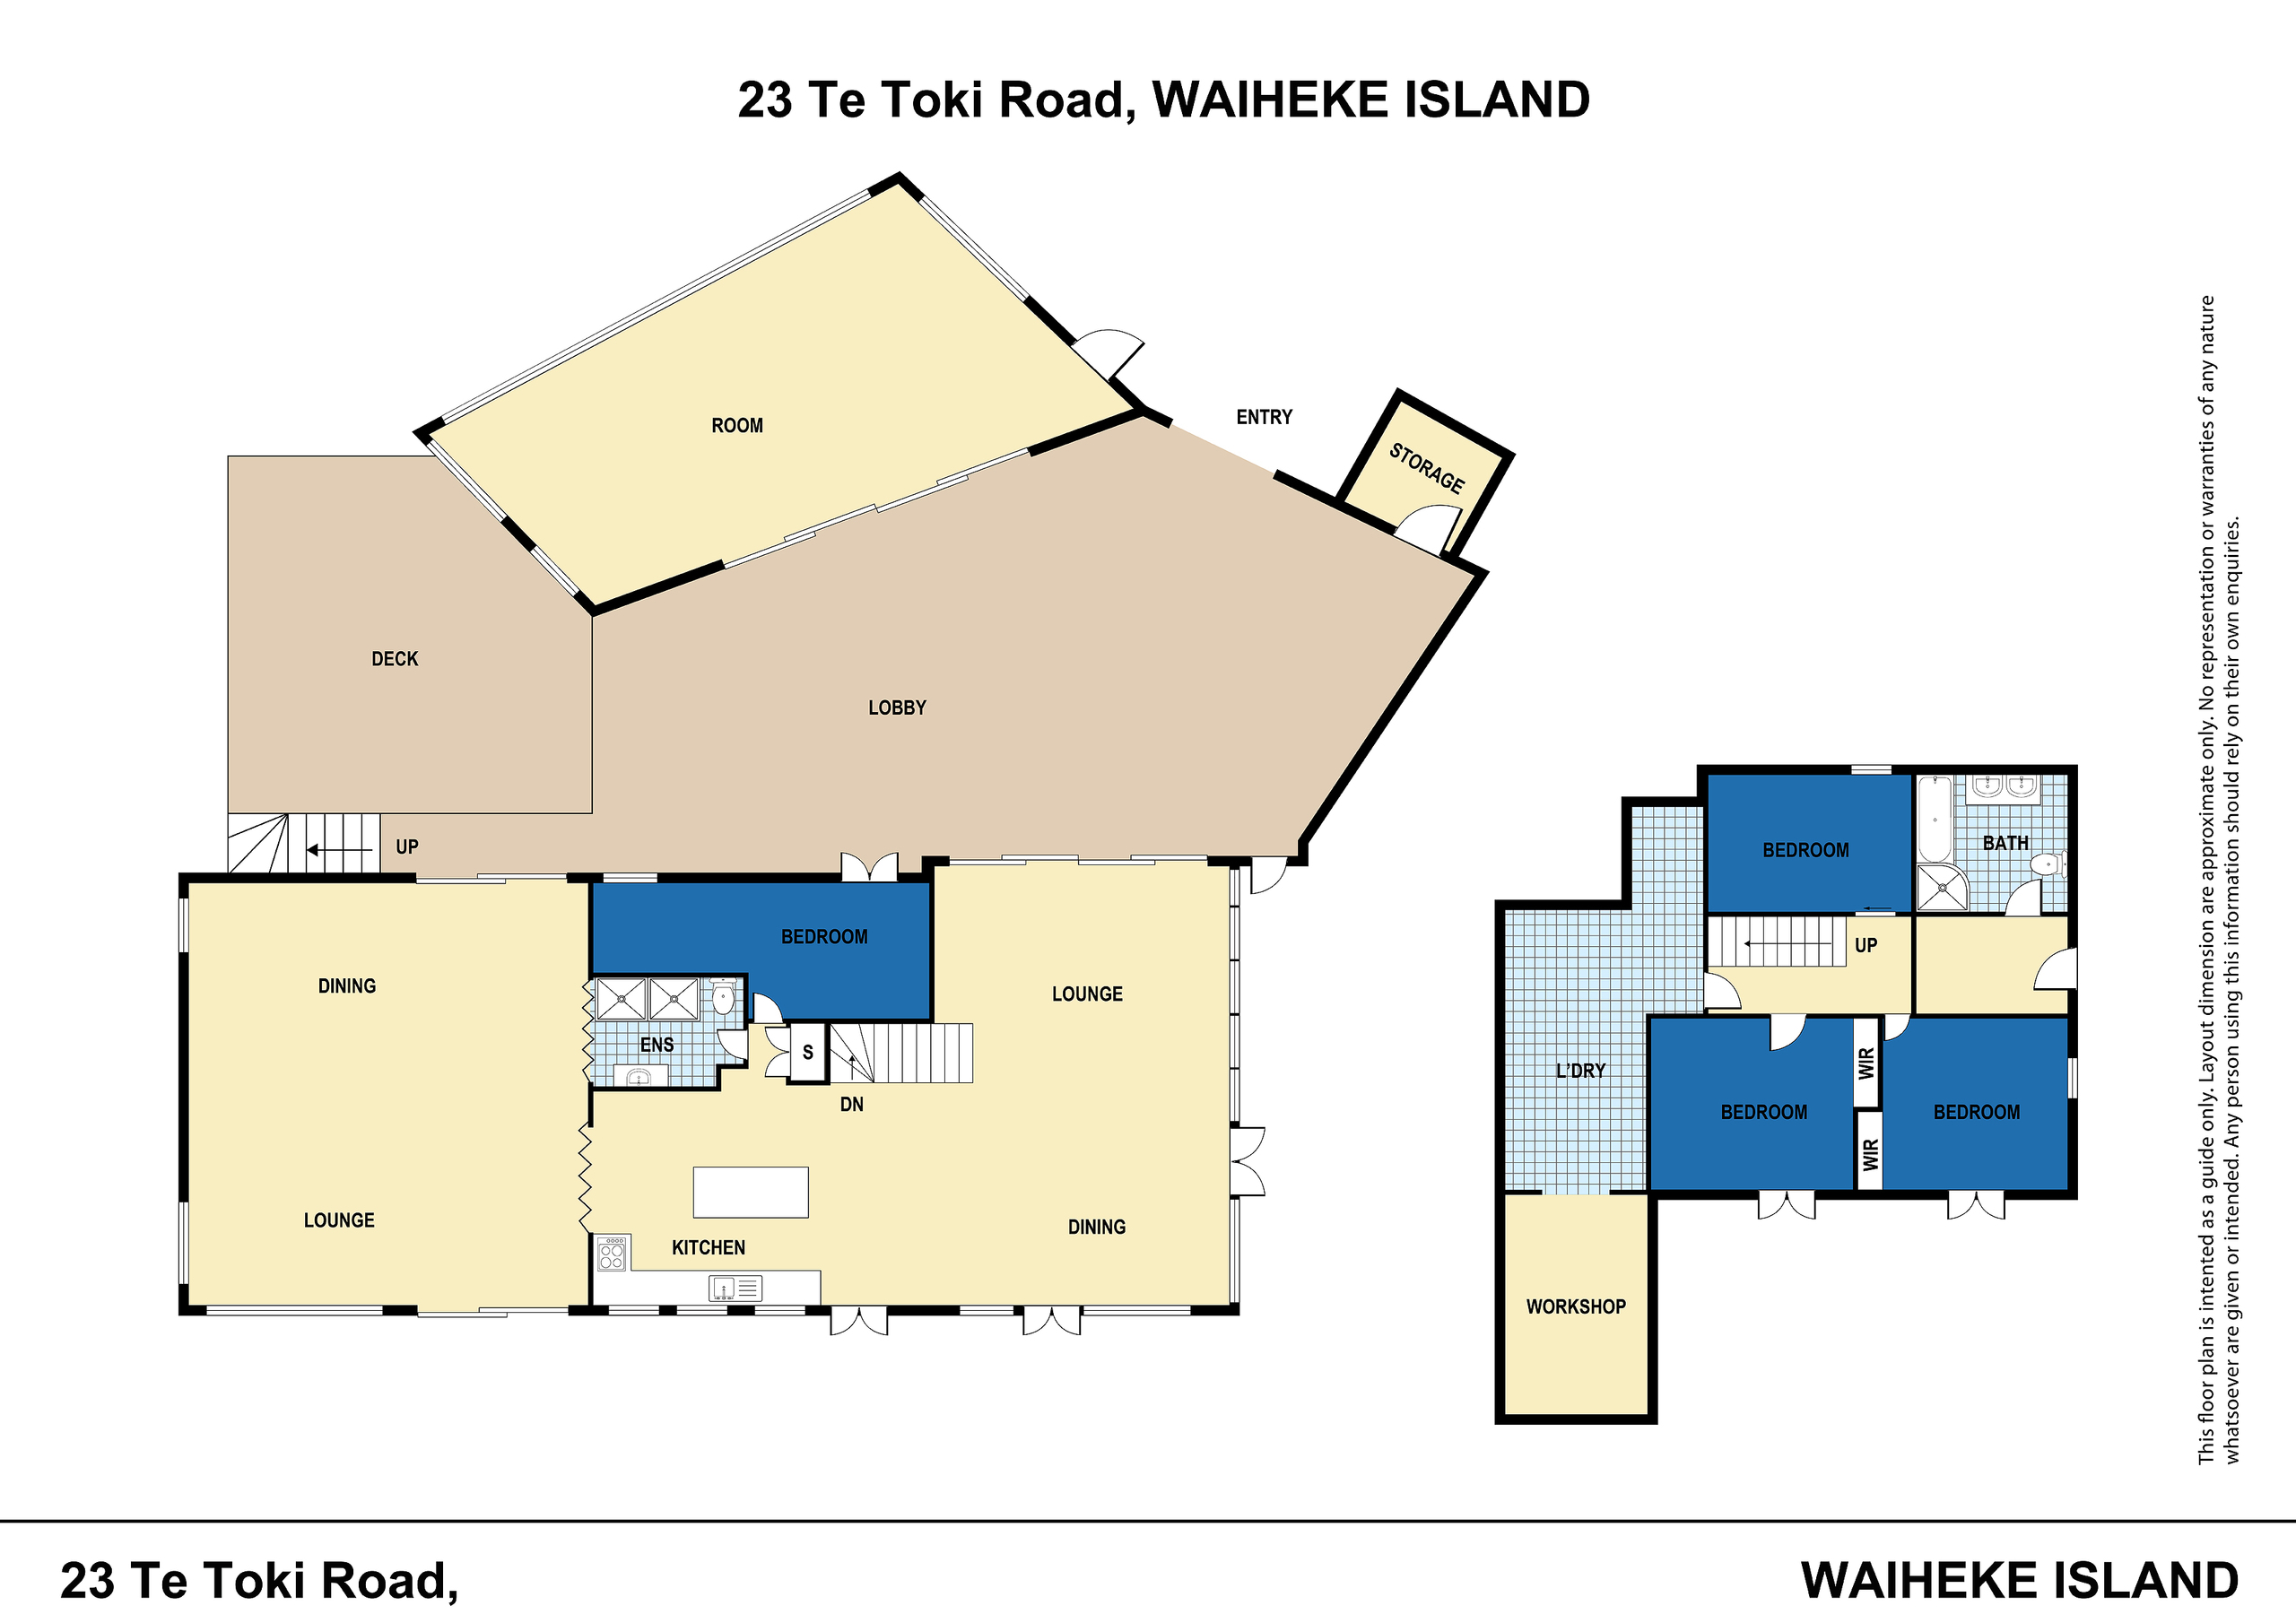 4 bed for sale in Palm Beach, Waiheke - Auckland - Property Floorplan